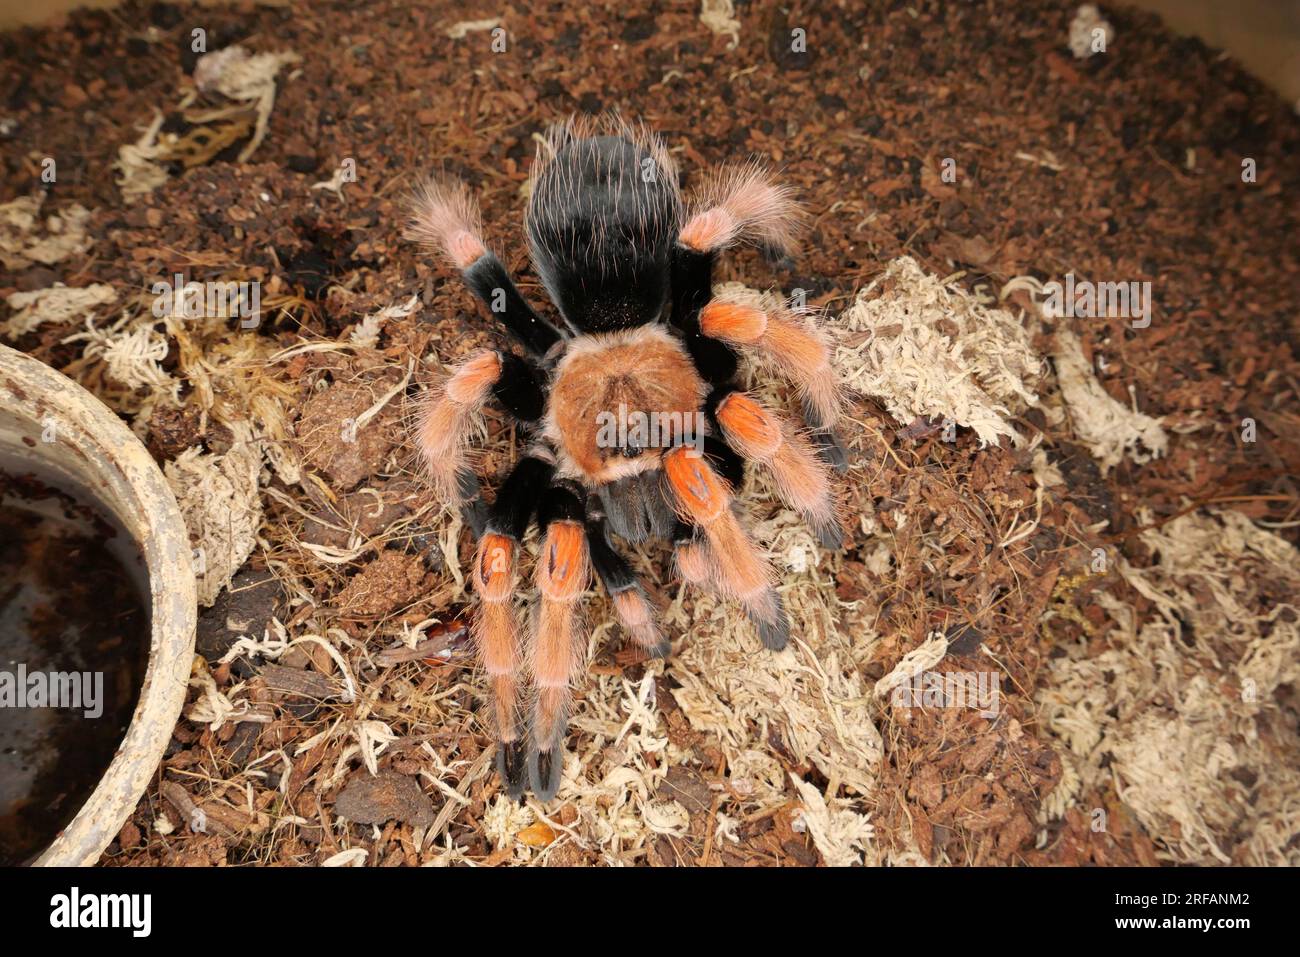 Derby Quad Insects Spiders Creepy Crawlies - Brachypelma Smithi, a species of spider in the family Theraphosidae which is native to Mexico. Stock Photo